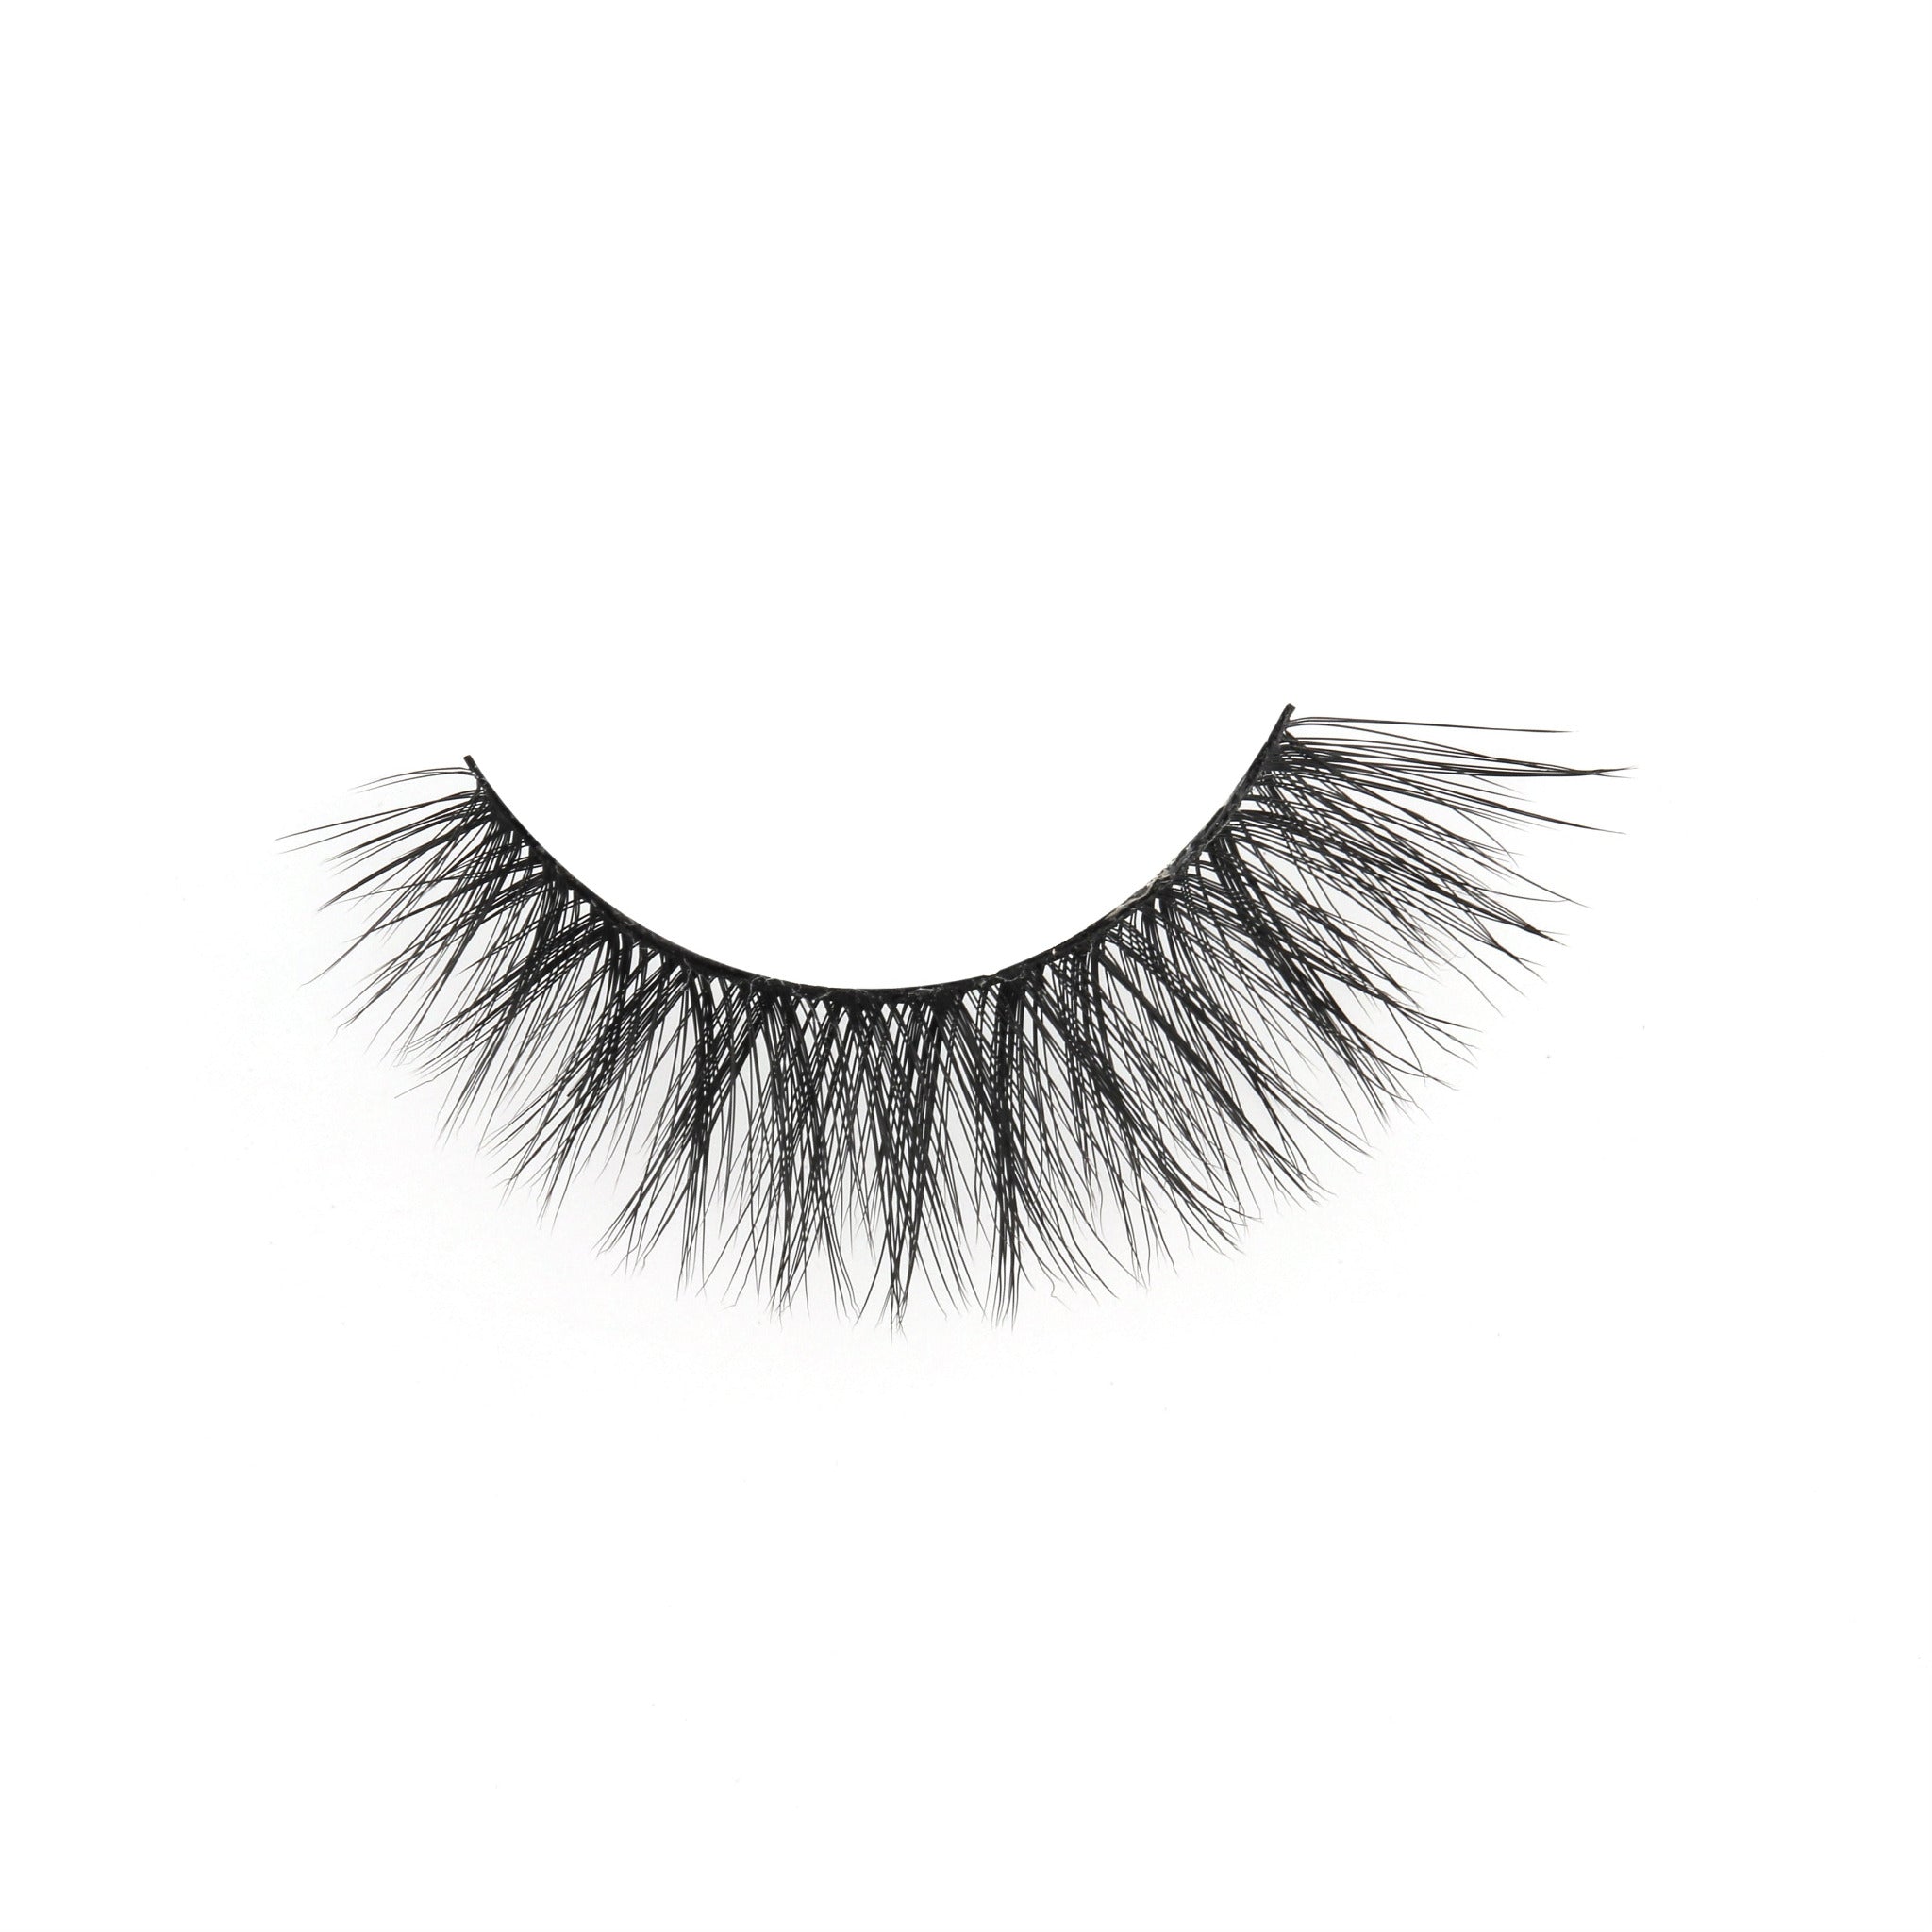 fluffly lashes, fluffly falsies, false lashes, strip lashes, false eyelashes, natural strip lash look, high quality strip lashes, volume style strip lashes, luxurious strip lashes, Biodegradable lashes